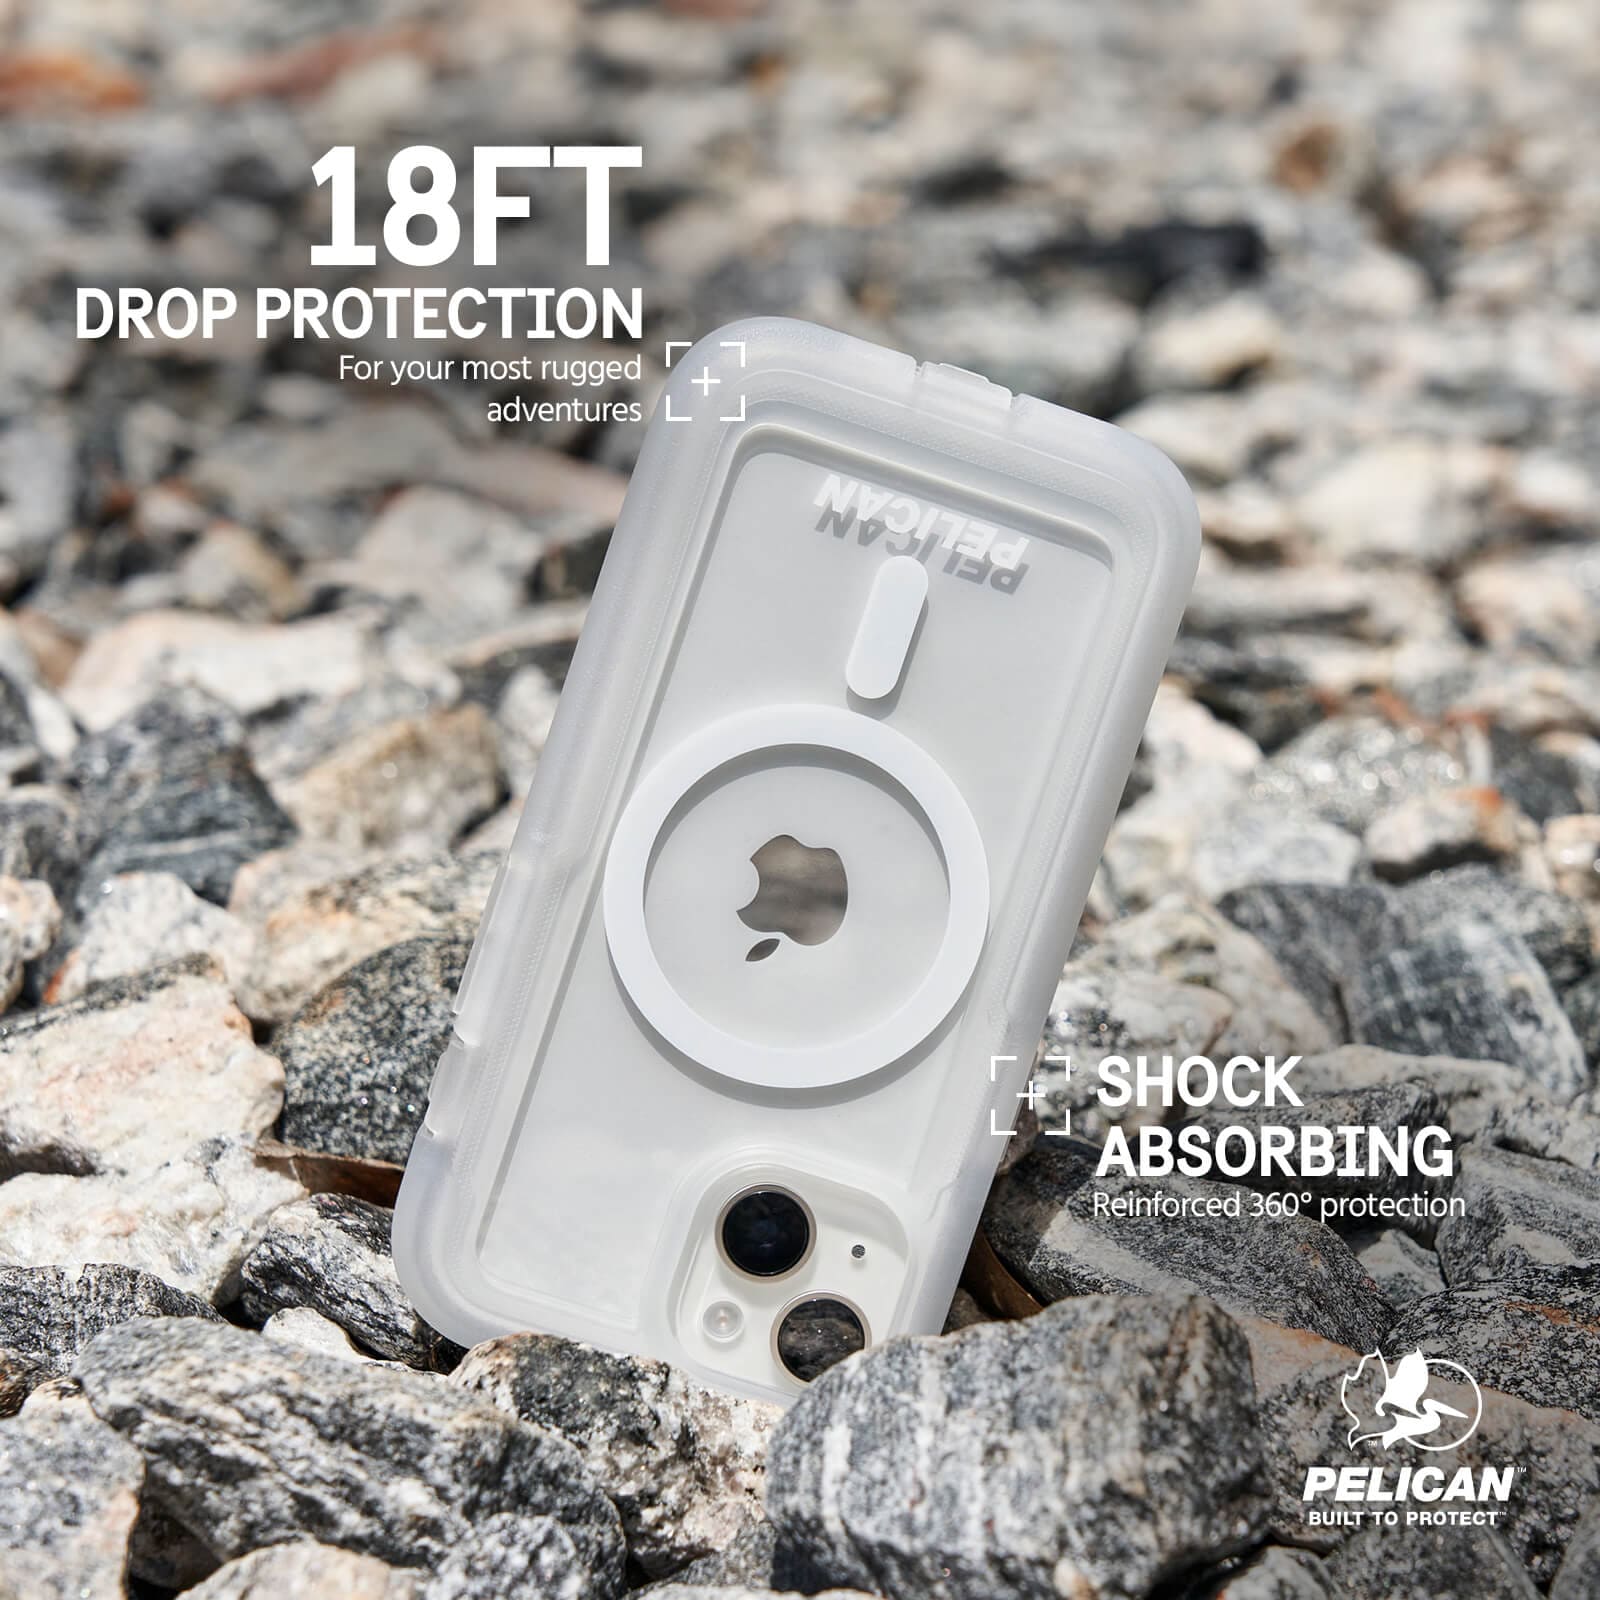 SHOCK ABSORBING REINFORCED 360 DEGREE PROTECTION. 18FT DROP PROTECTION. FOR YOUR MOST RUGGED ADVENTURES.